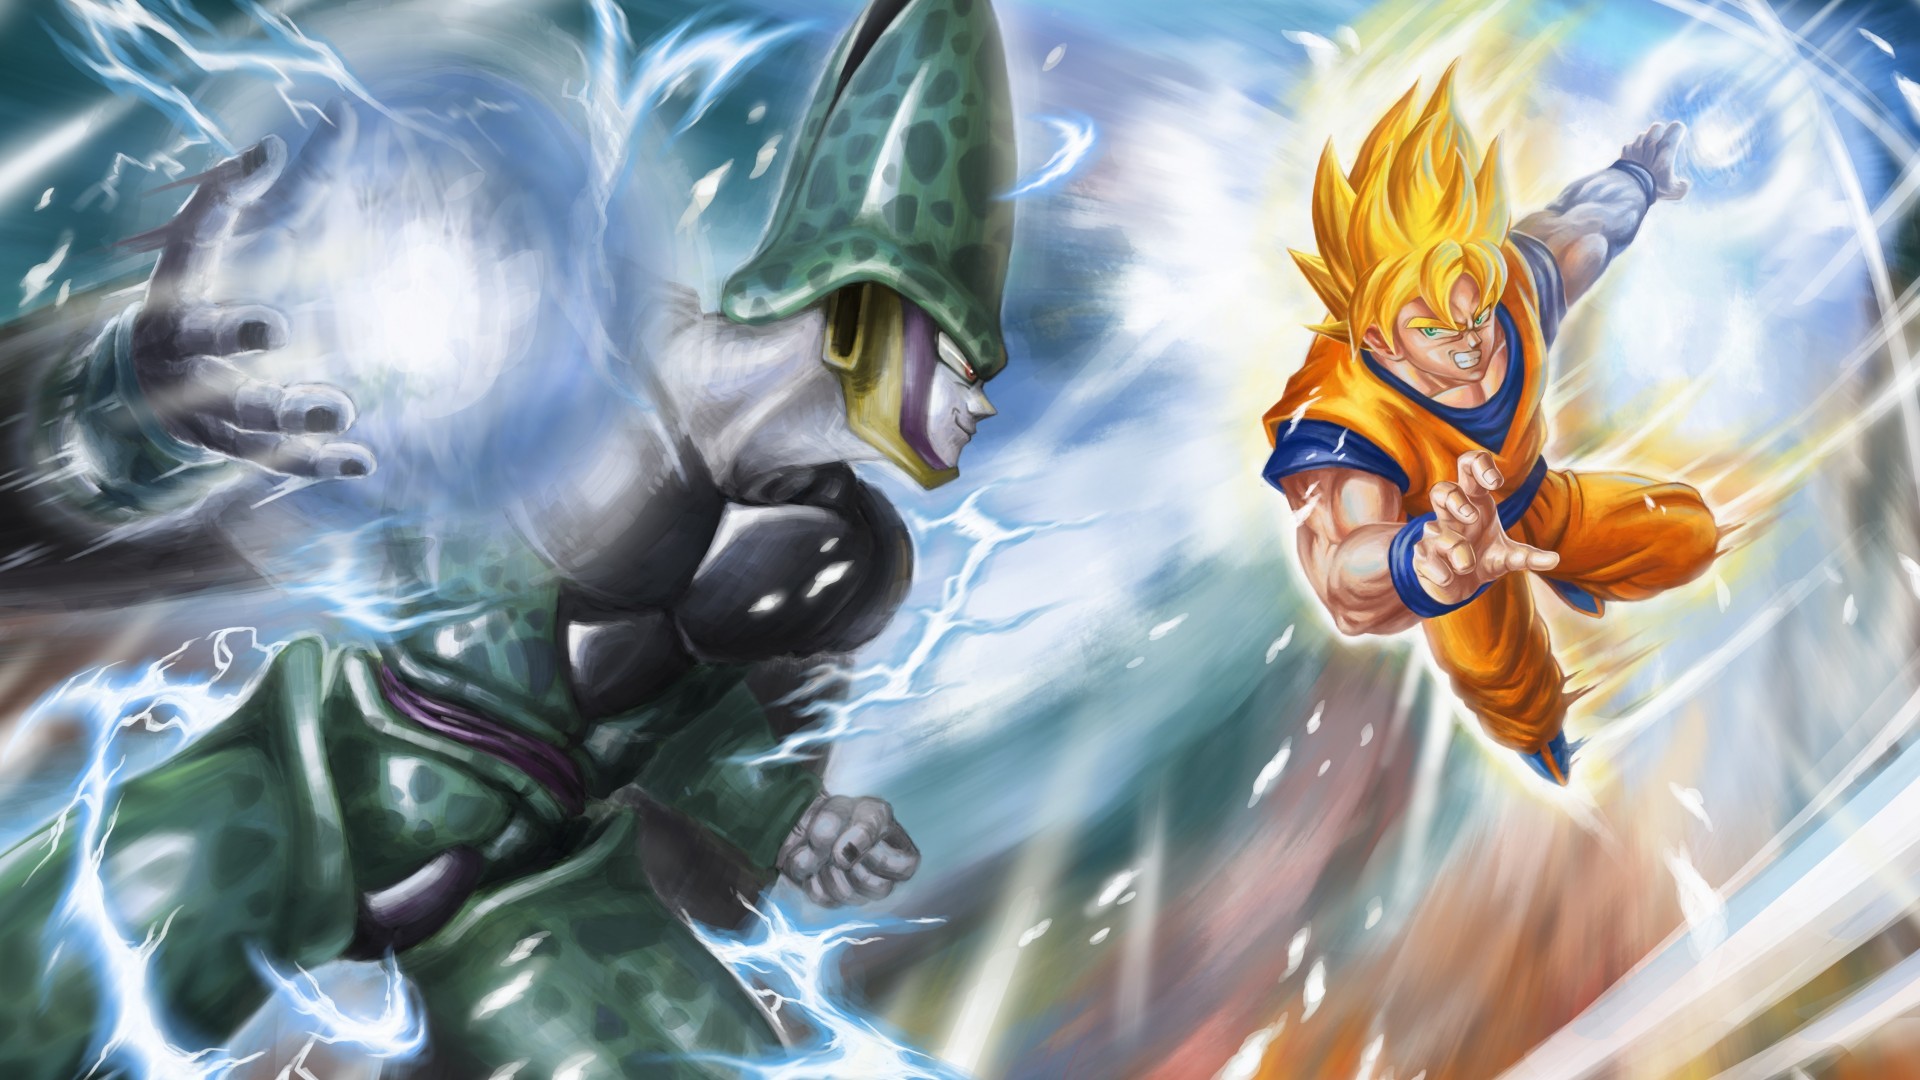 SSJ Goku vs Perfect Cell – Another well choreographed fight in Dbz. and the shock of Goku forfeiting the match to Cell and passing the torch to Gohan